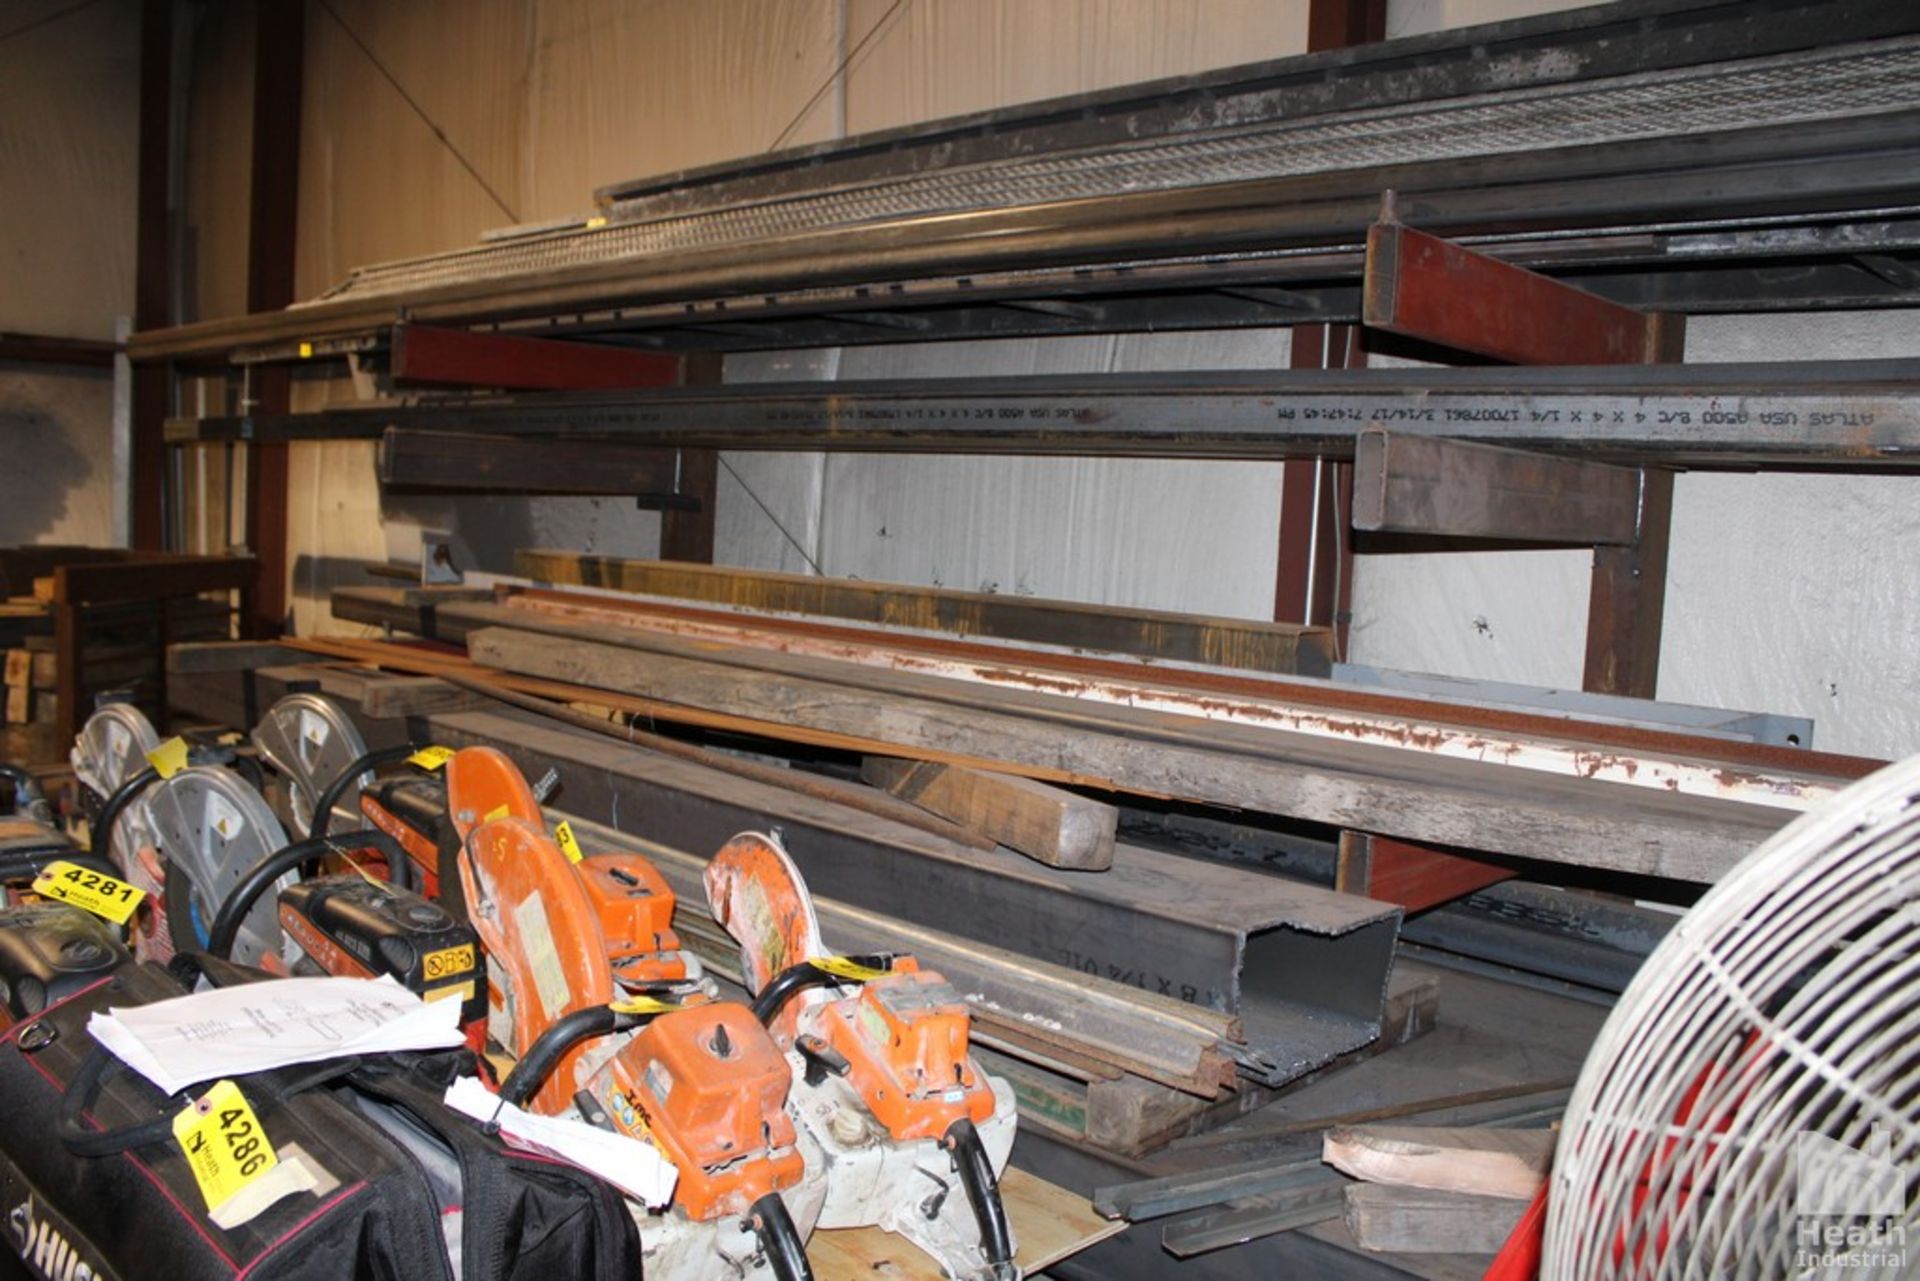 CANTILEVER STEEL RACK APPROX. 12' WIDE BY 8' HIGH WELDED